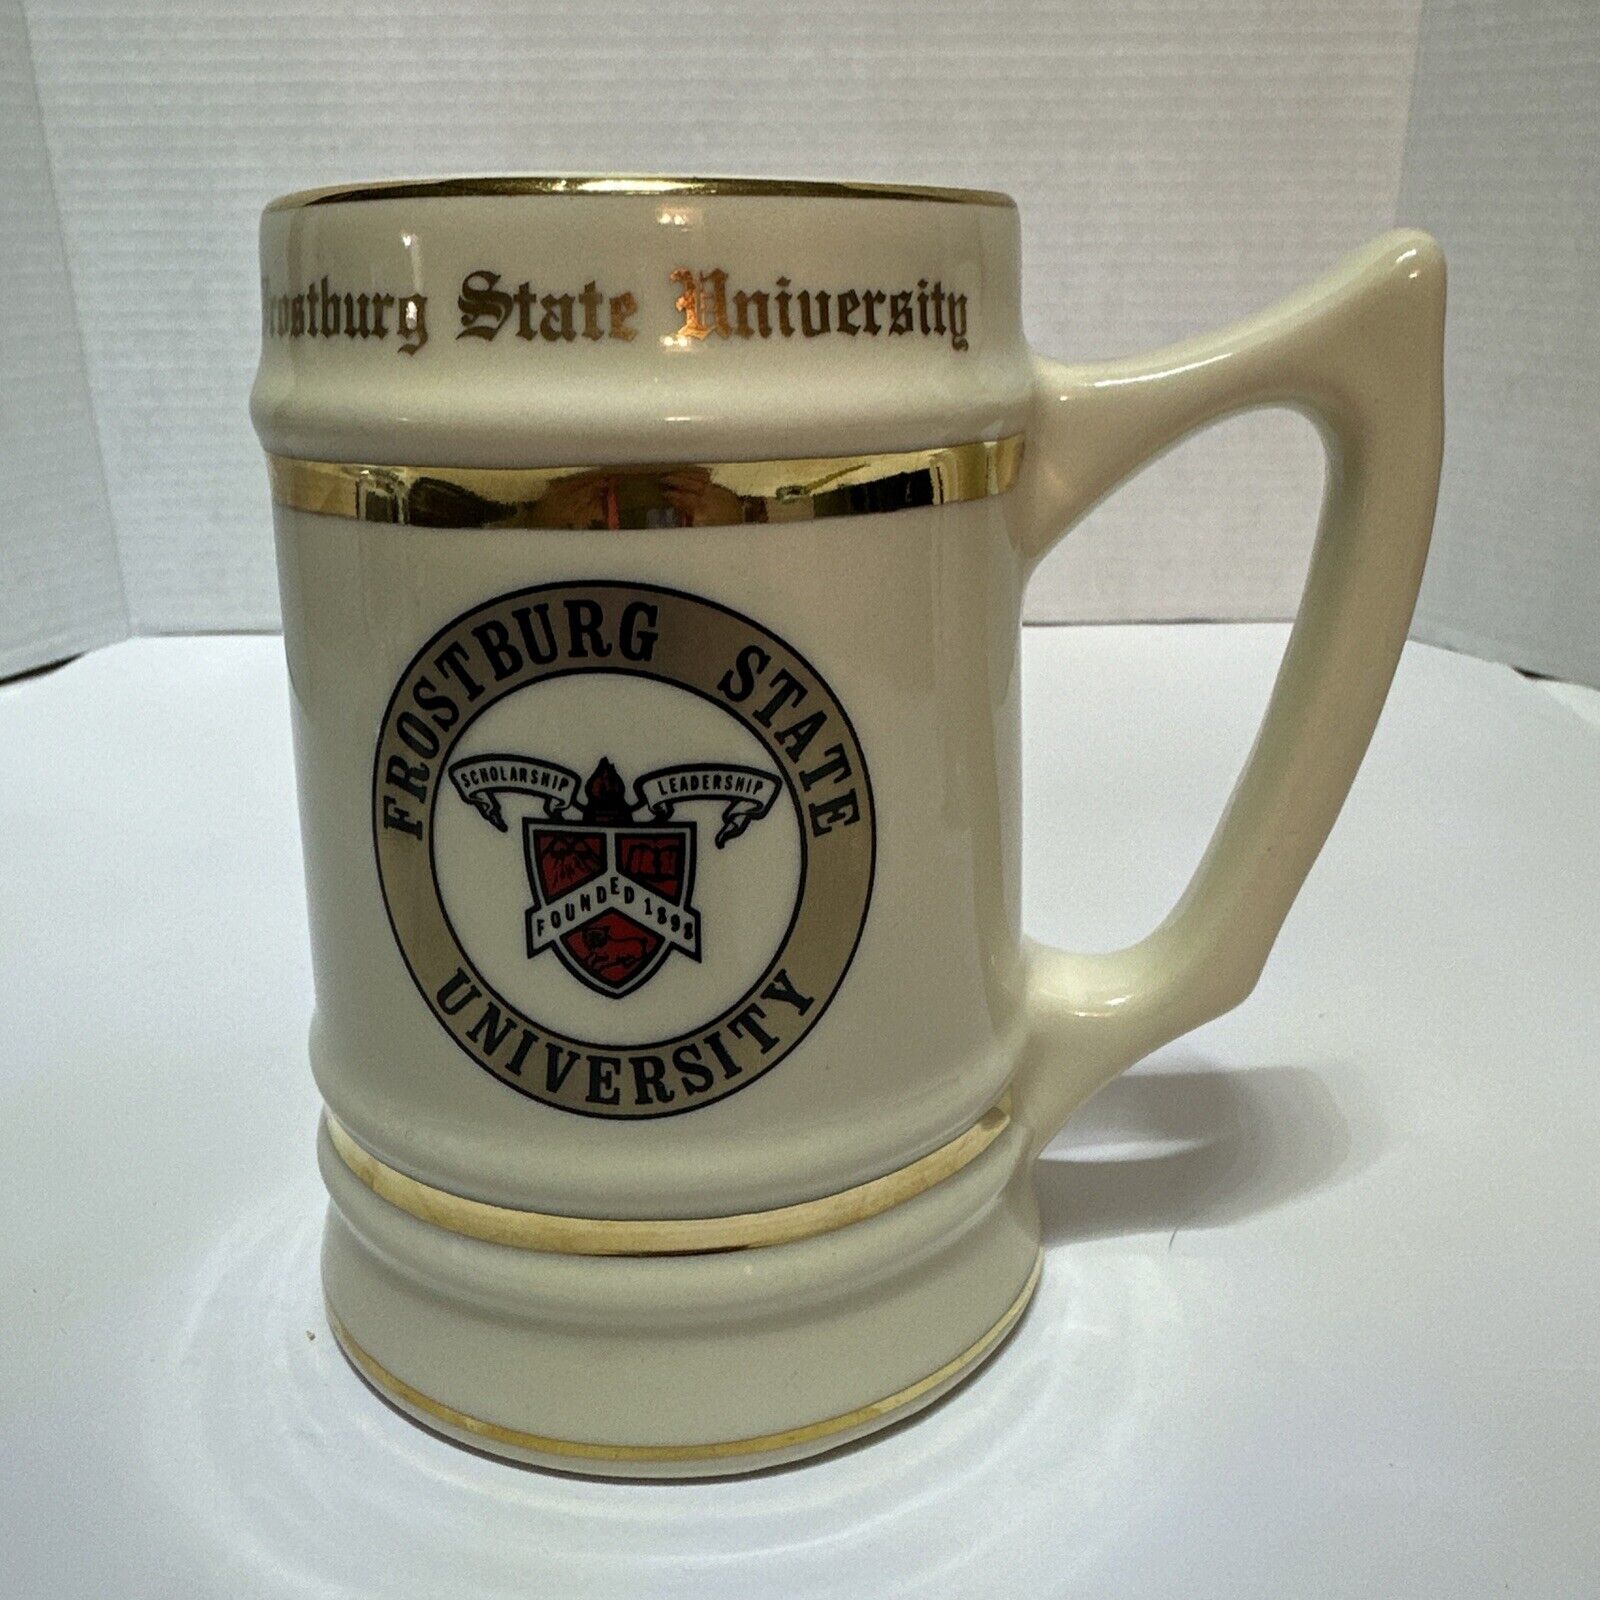 Frostburg State University STEIN Beer Mug MADE BY W.C. BUNTING CO Ceramic Gold